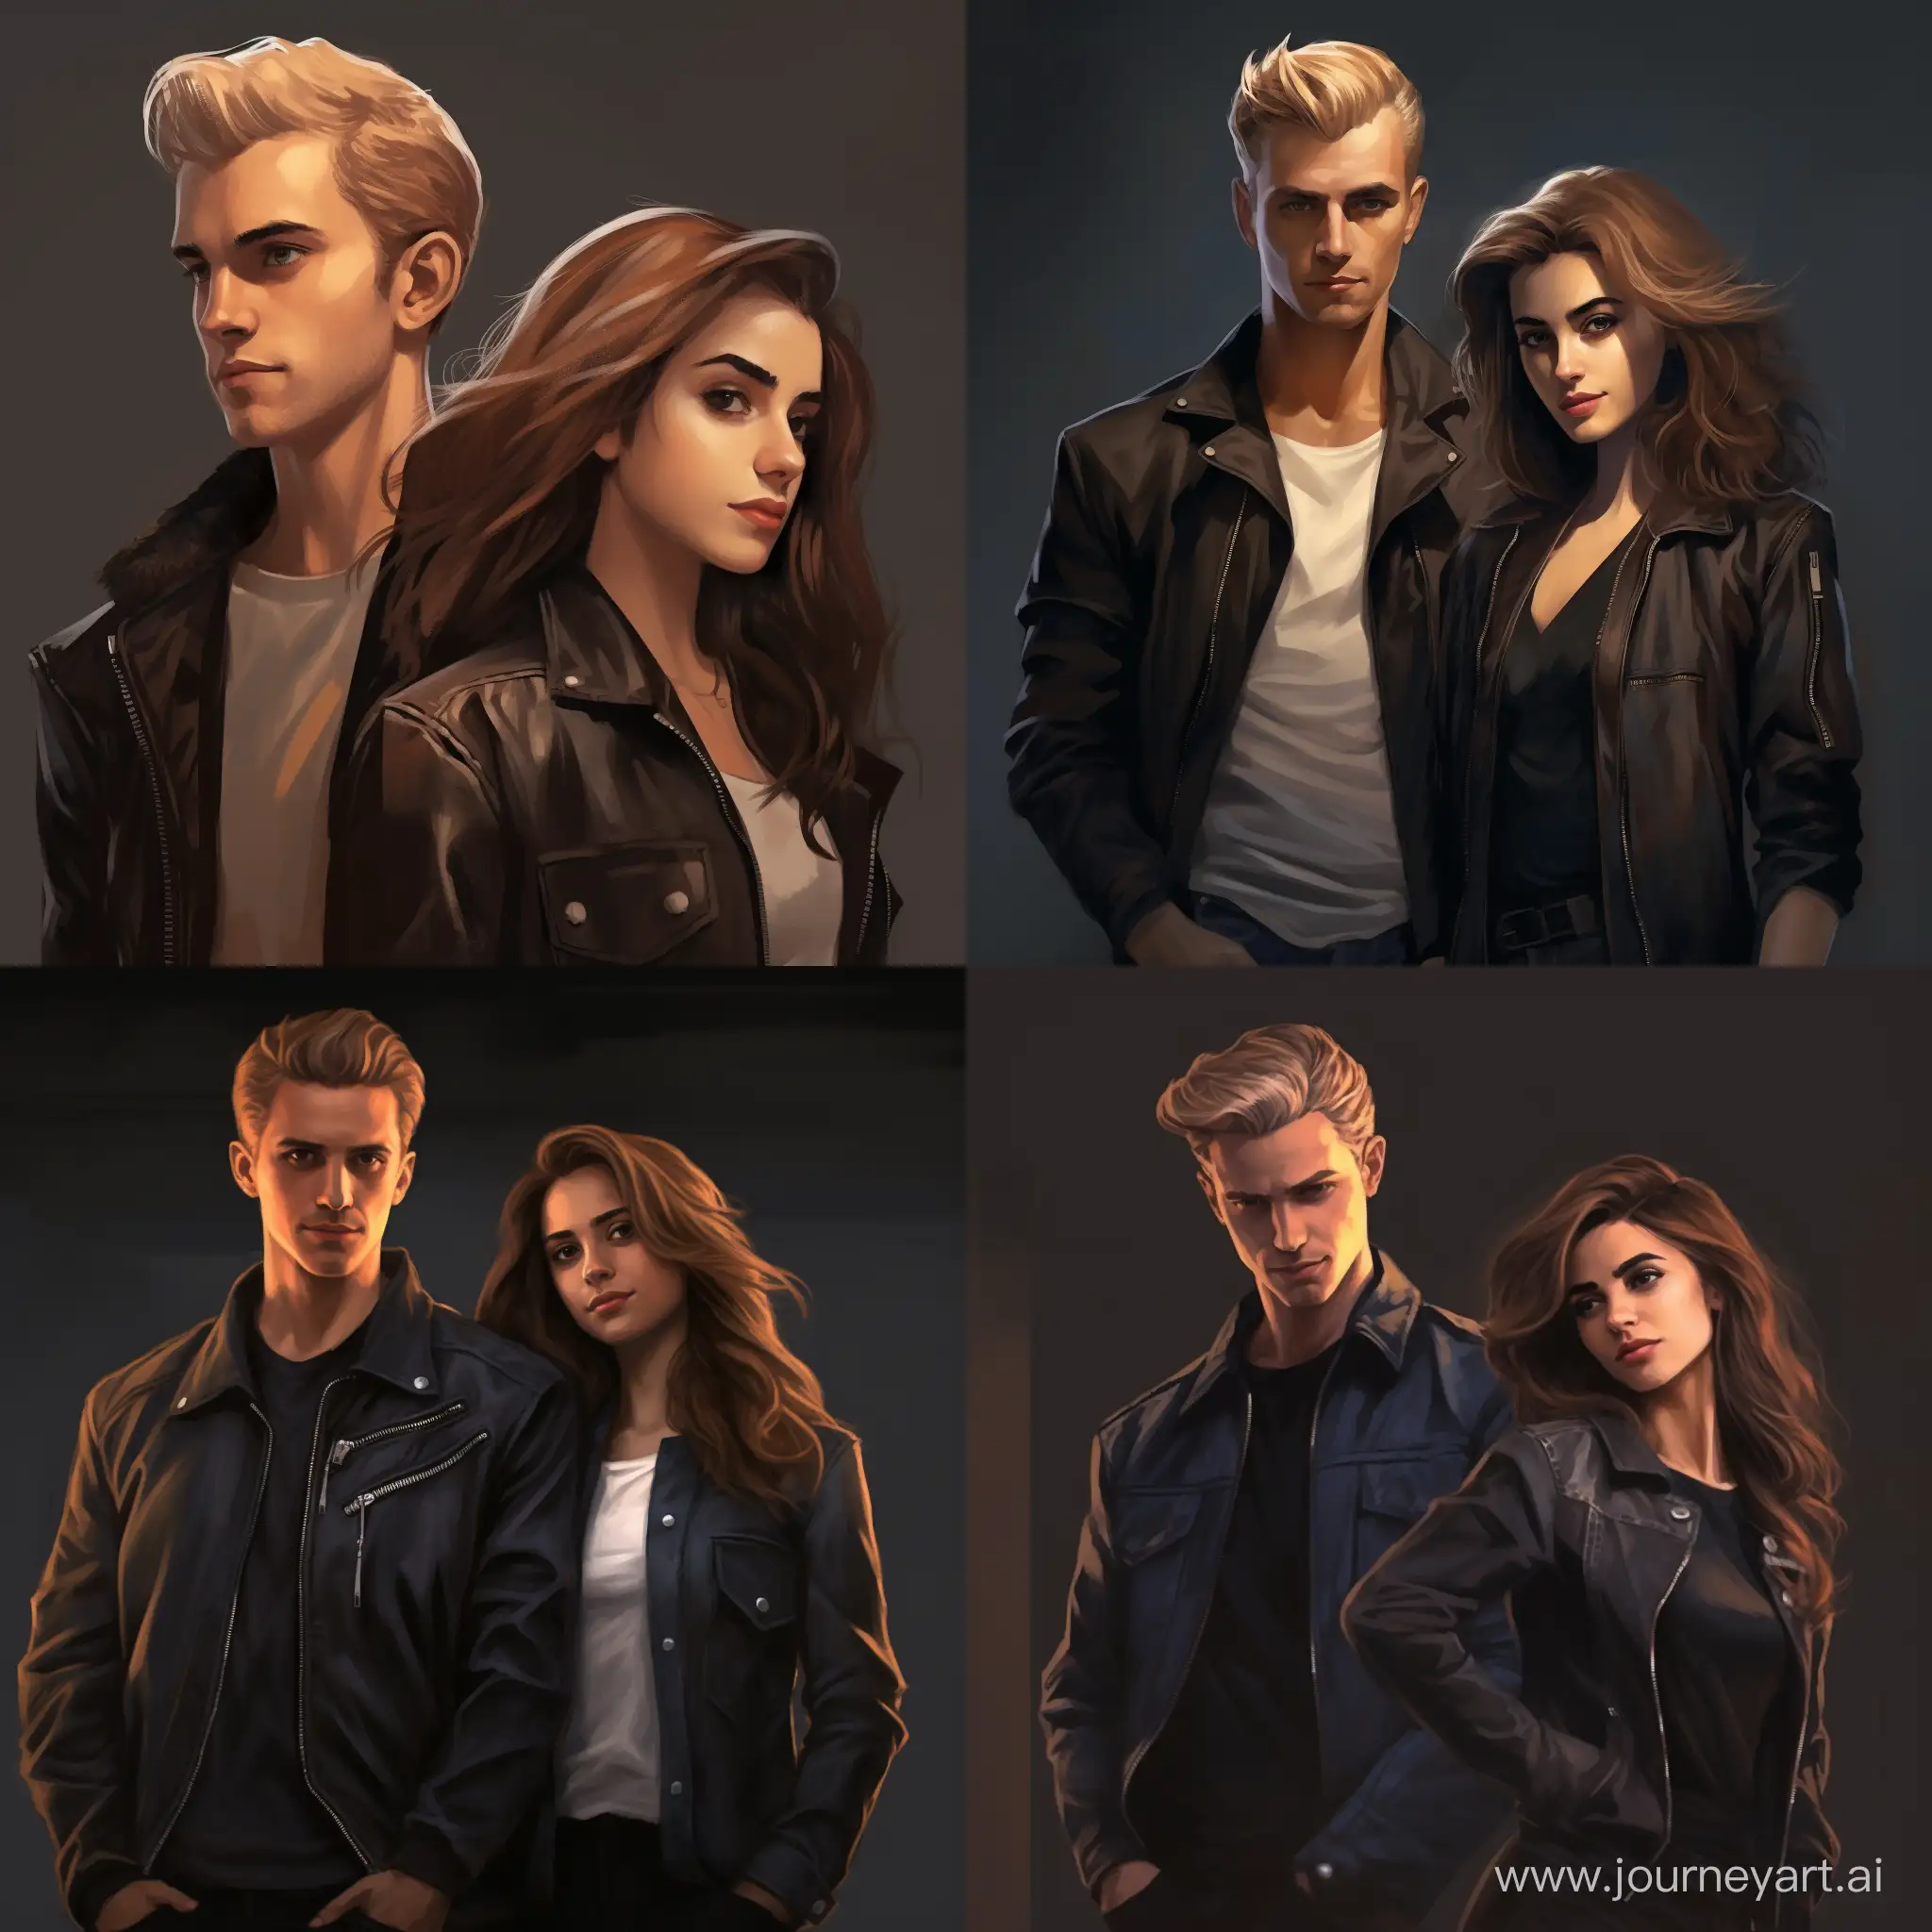 Draco-Malfoy-and-Hermione-Granger-in-Stylish-Leather-Jacket-Encounter